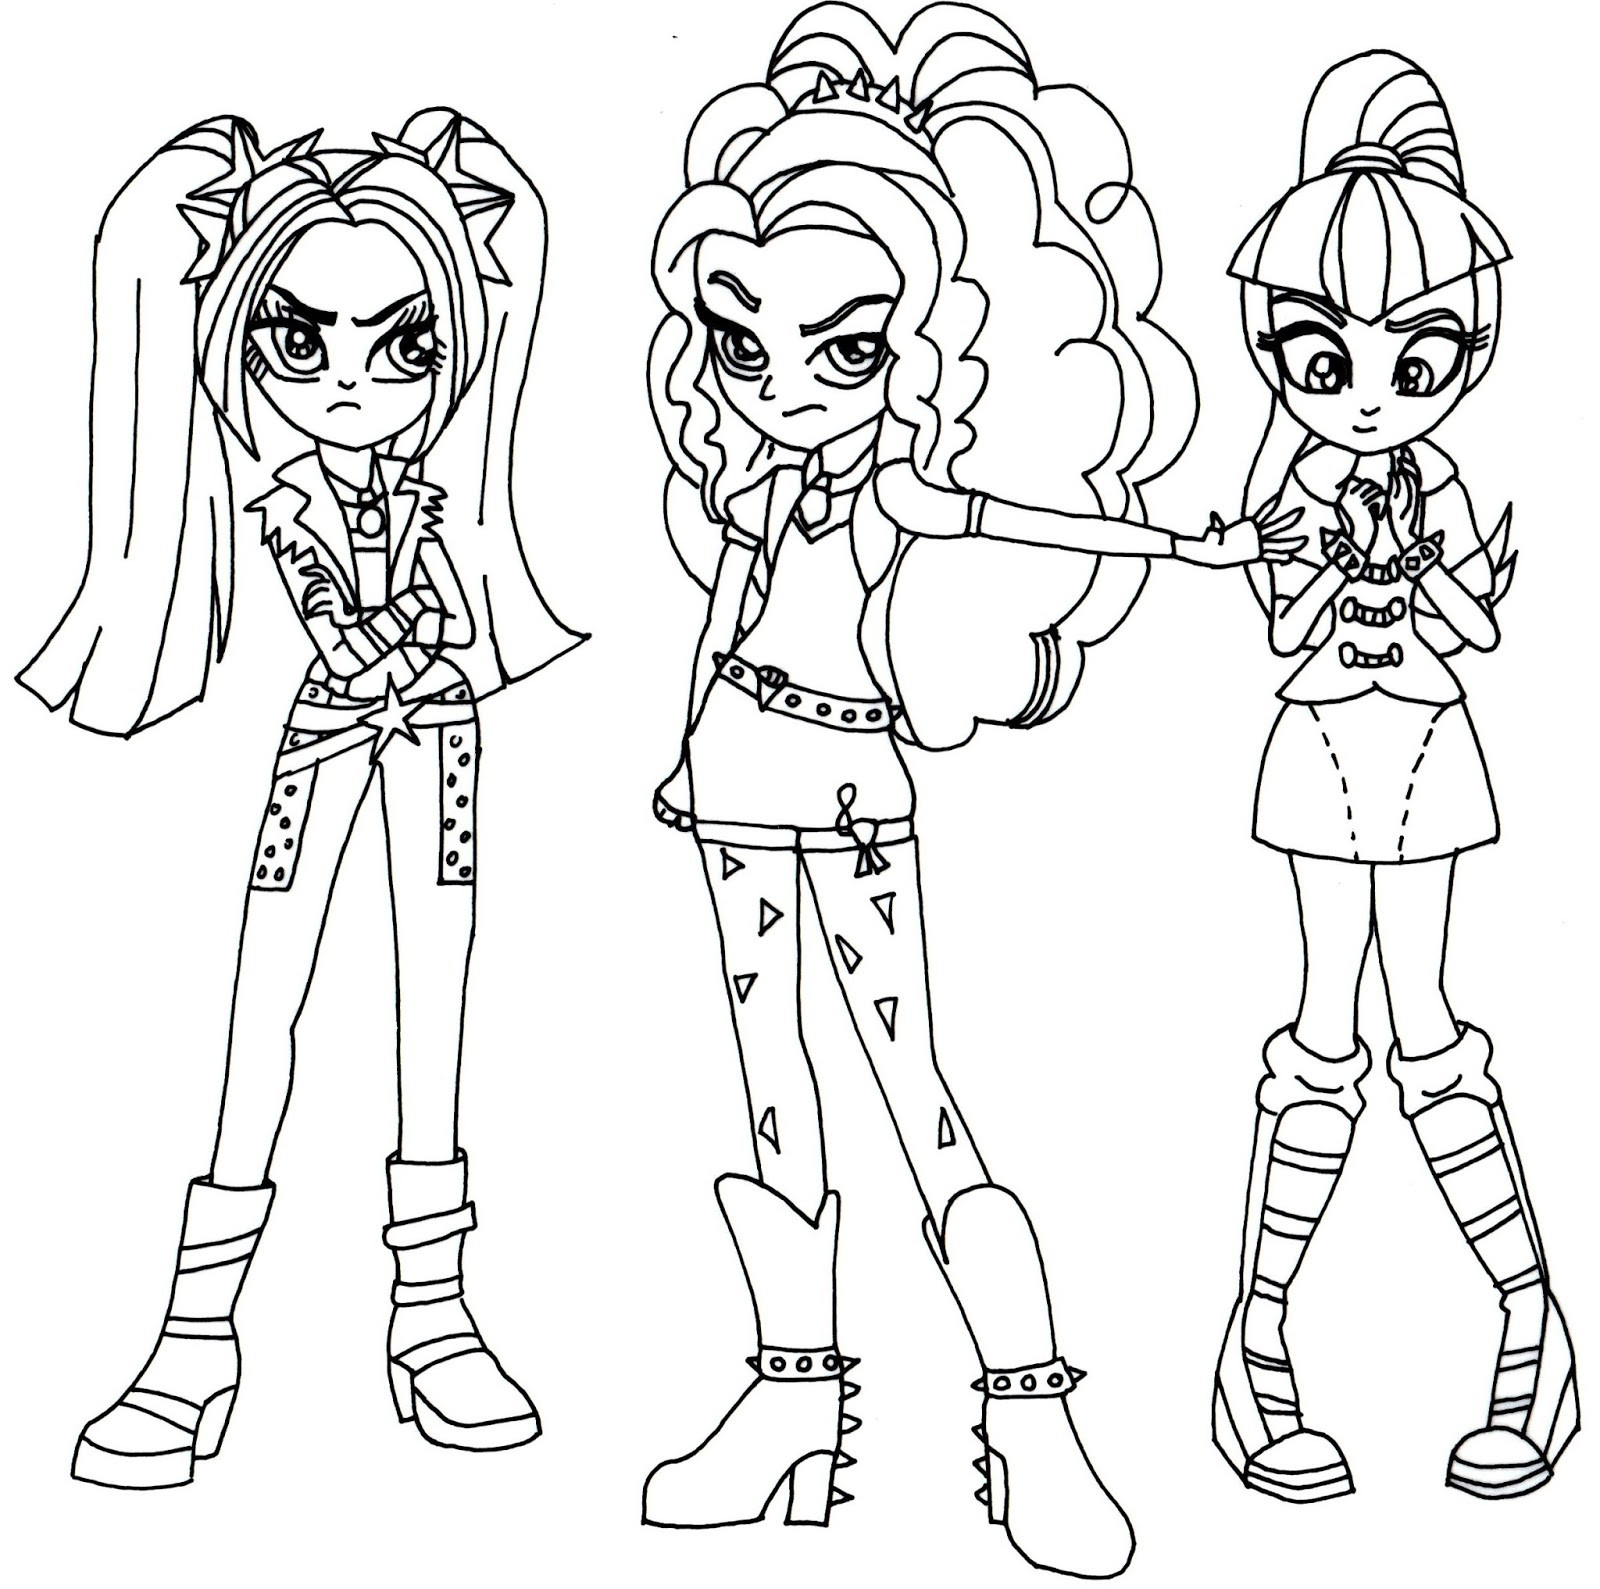 Equestria Girls Coloring Book
 Free Printable My Little Pony Coloring Pages Villain in